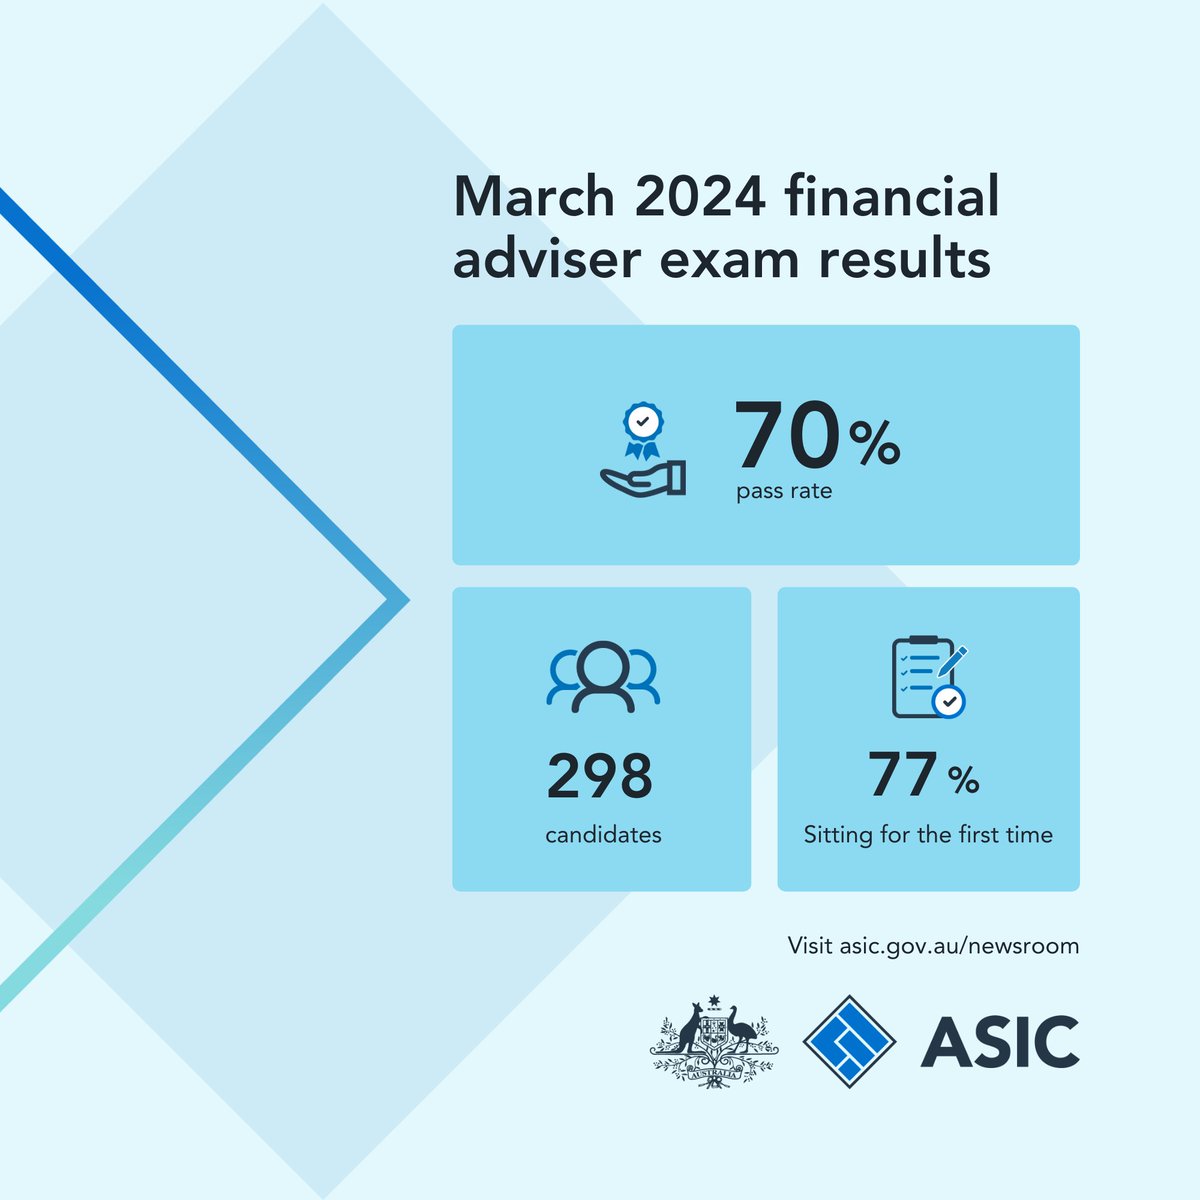 We have released results from the March 2024 #FinancialAdvisers exam cycle, the first to reflect recent changes to improve the delivery and accessibility of the exam. To date, over 21,000 individuals have sat the exam, of which 92% have passed bit.ly/3y3Hq3y